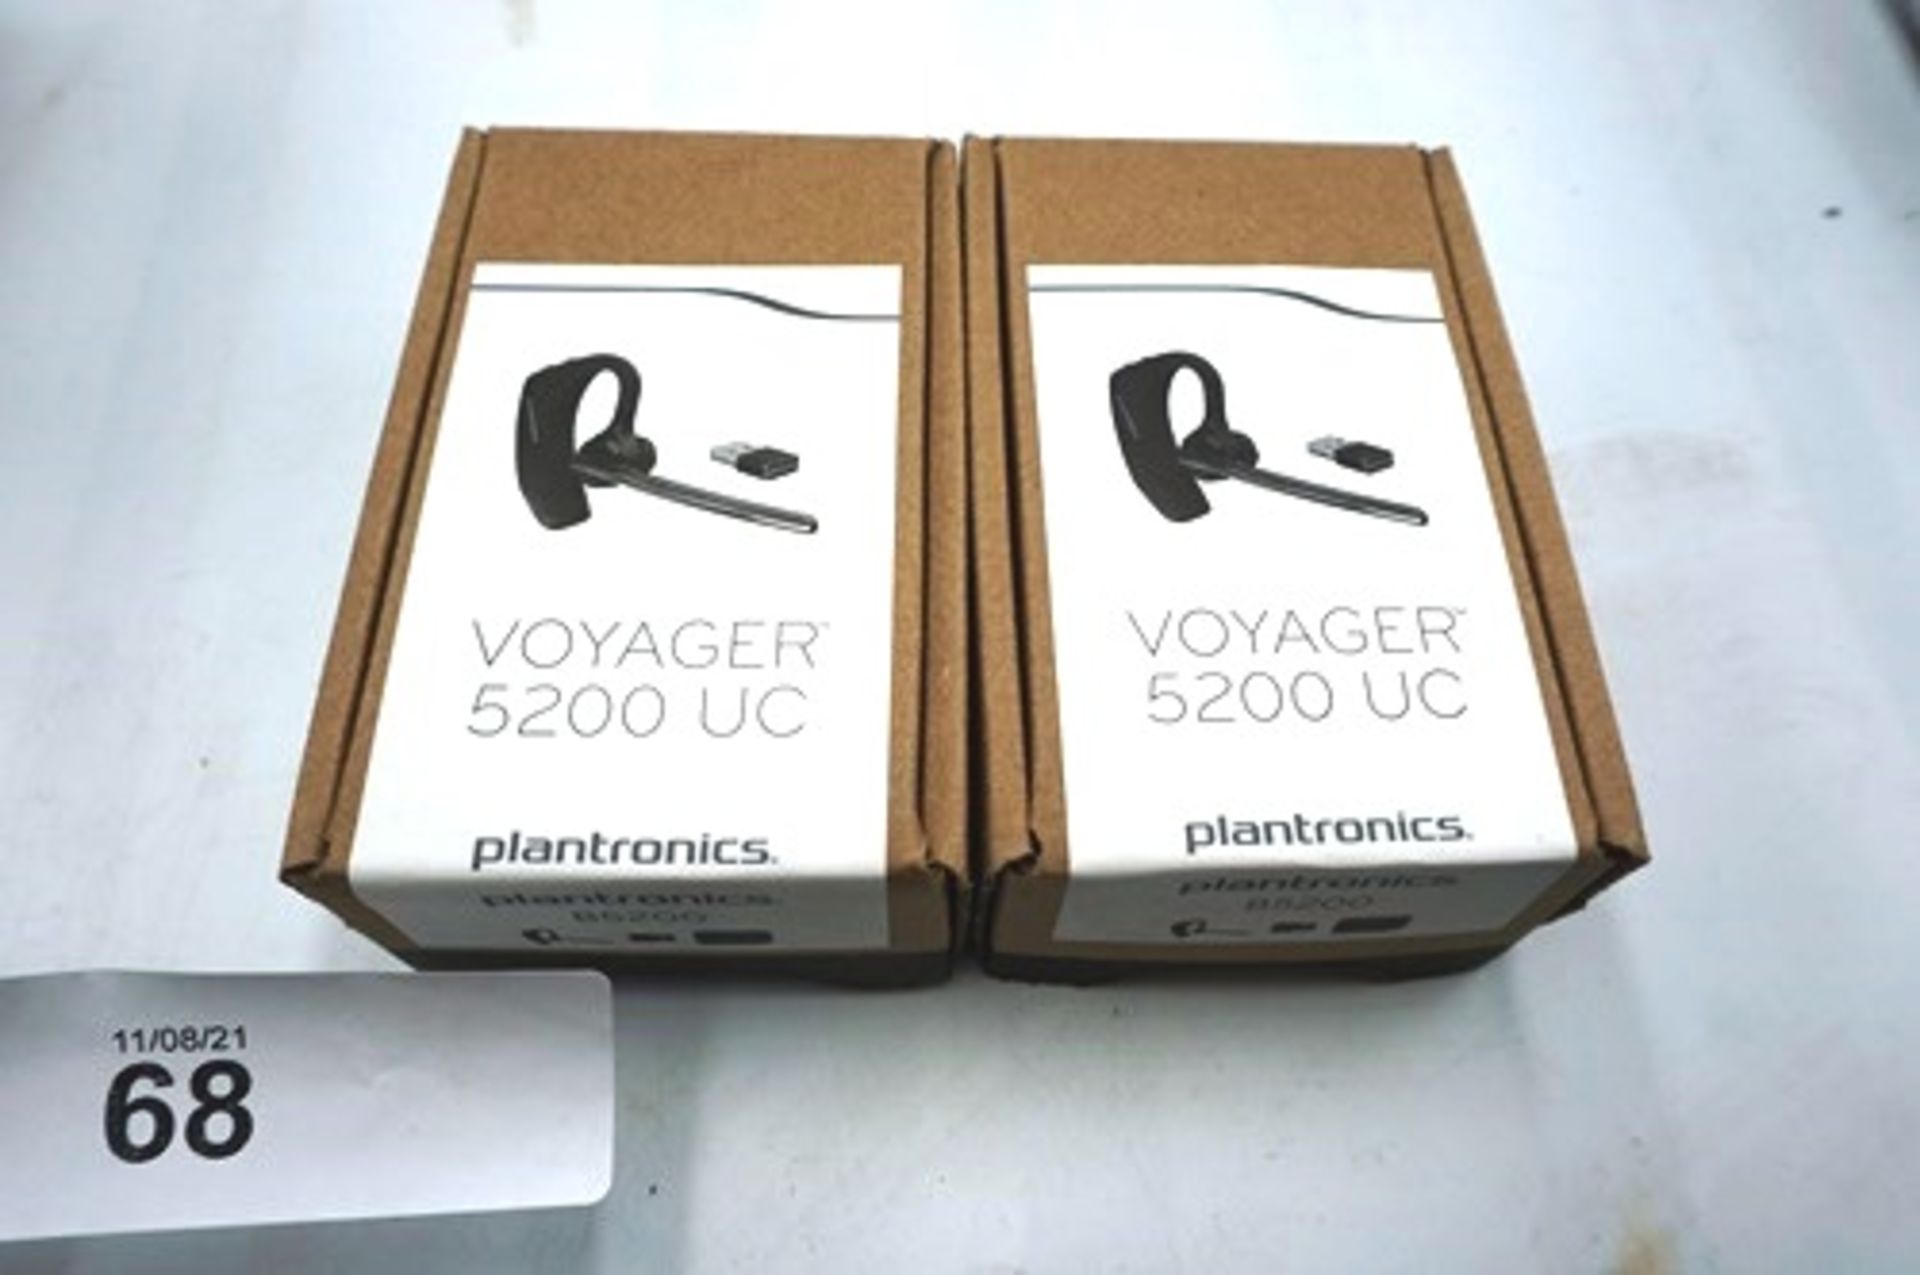 2 x Plantronics Voyager 5200UC wireless office headphones, model 206110-101 - sealed new in box (